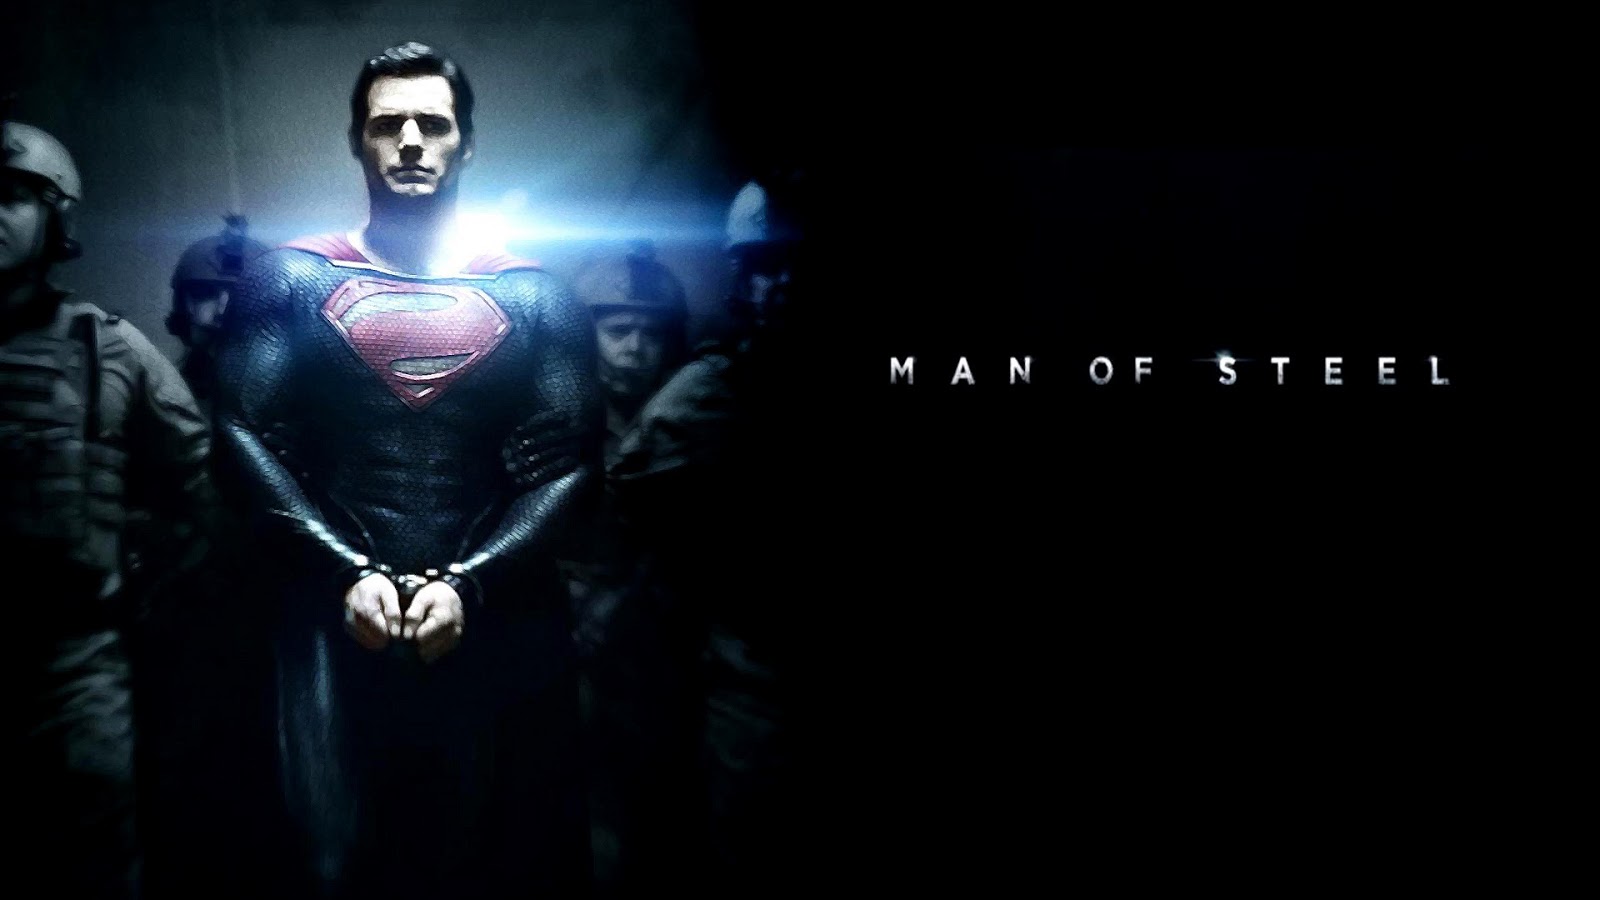 Man of Steel 2013 Wallpaper Wallpapers Factory to make